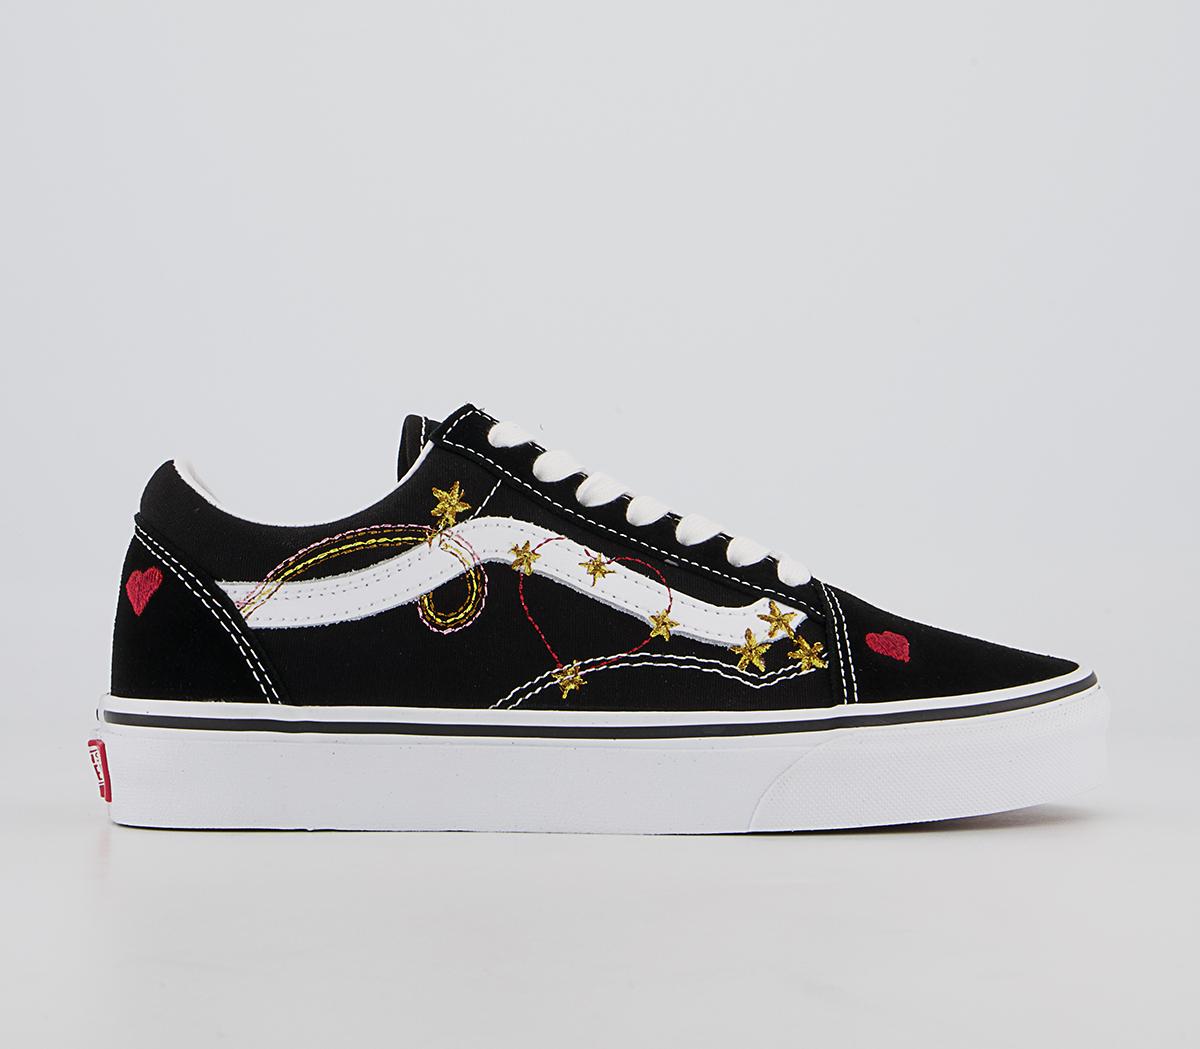 Gravere præambel reagere Vans Old Skool Trainers Black Gold Star Embroidery Exclusive - Women's  Trainers